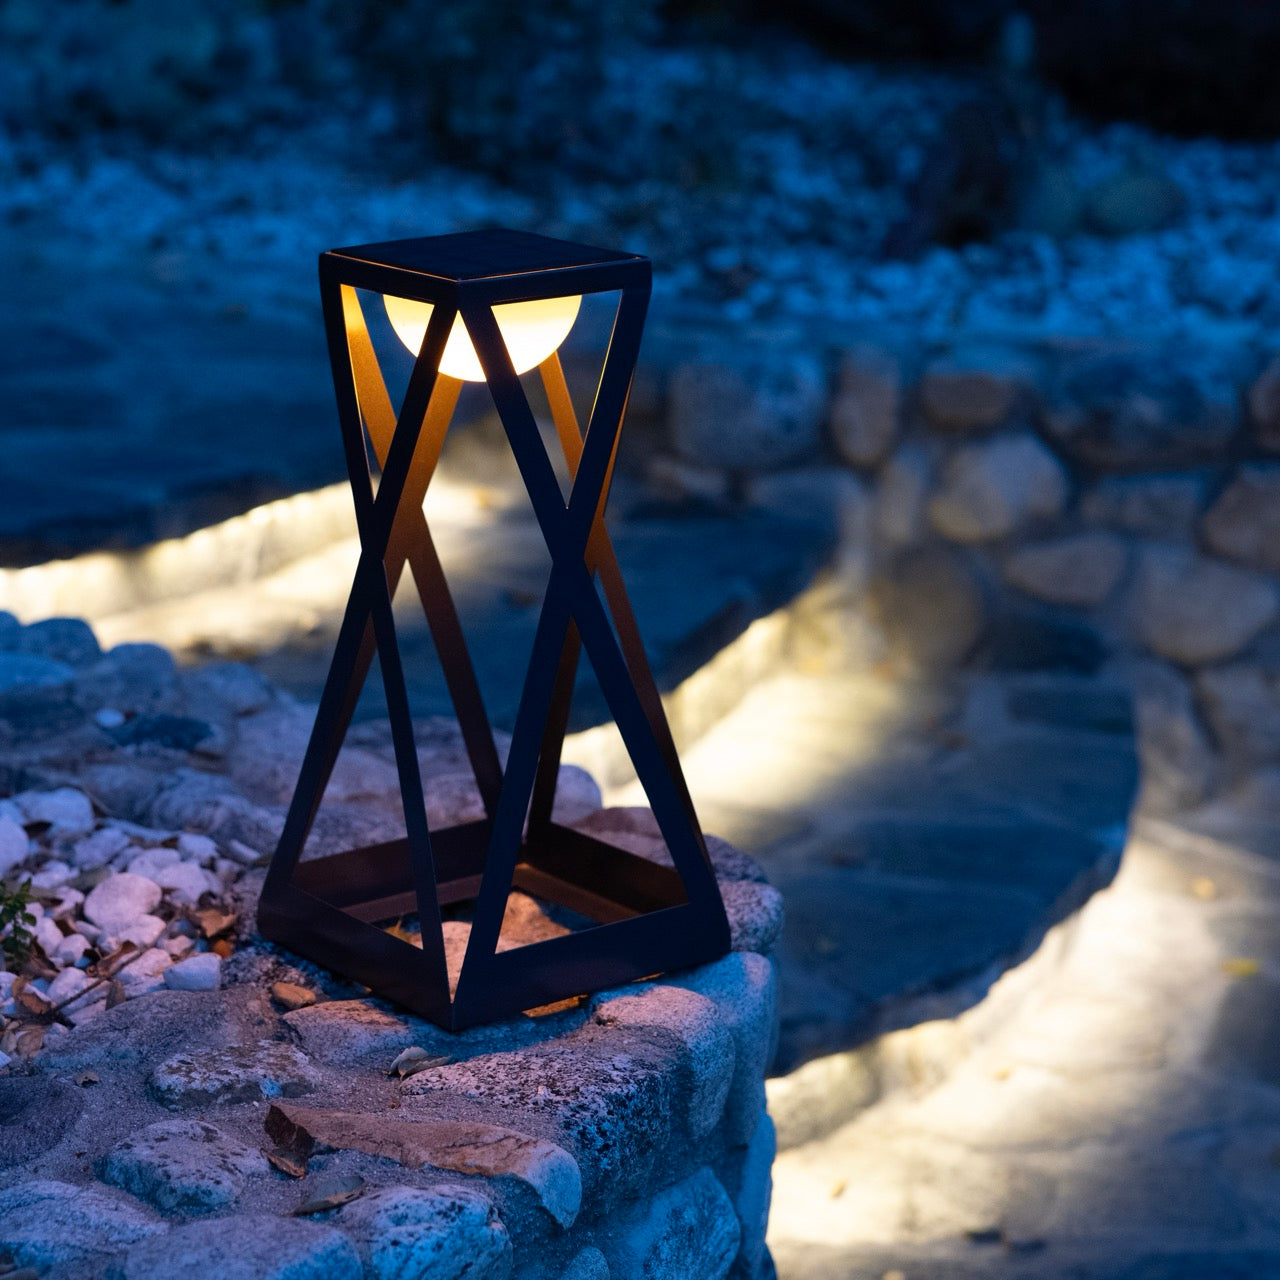 Rick solar lantern with ykary bulb white light outdoor on rock and steps